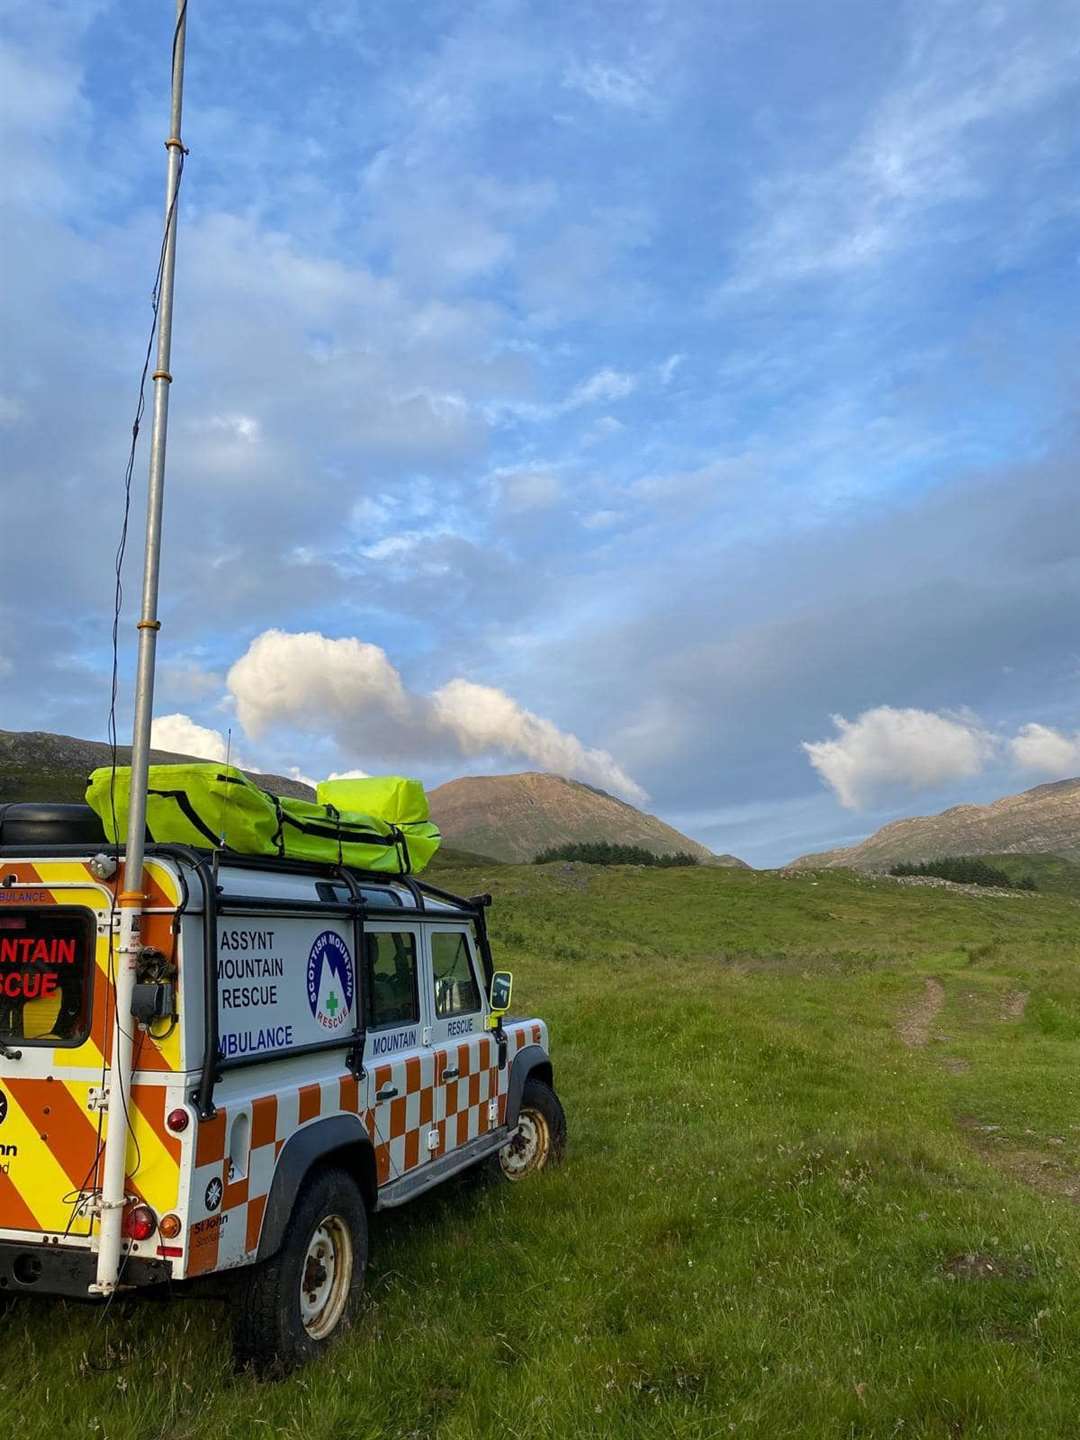 Eleven members of Assynt Mountain Rescue Team were called out around 5.30pm on Thursday.